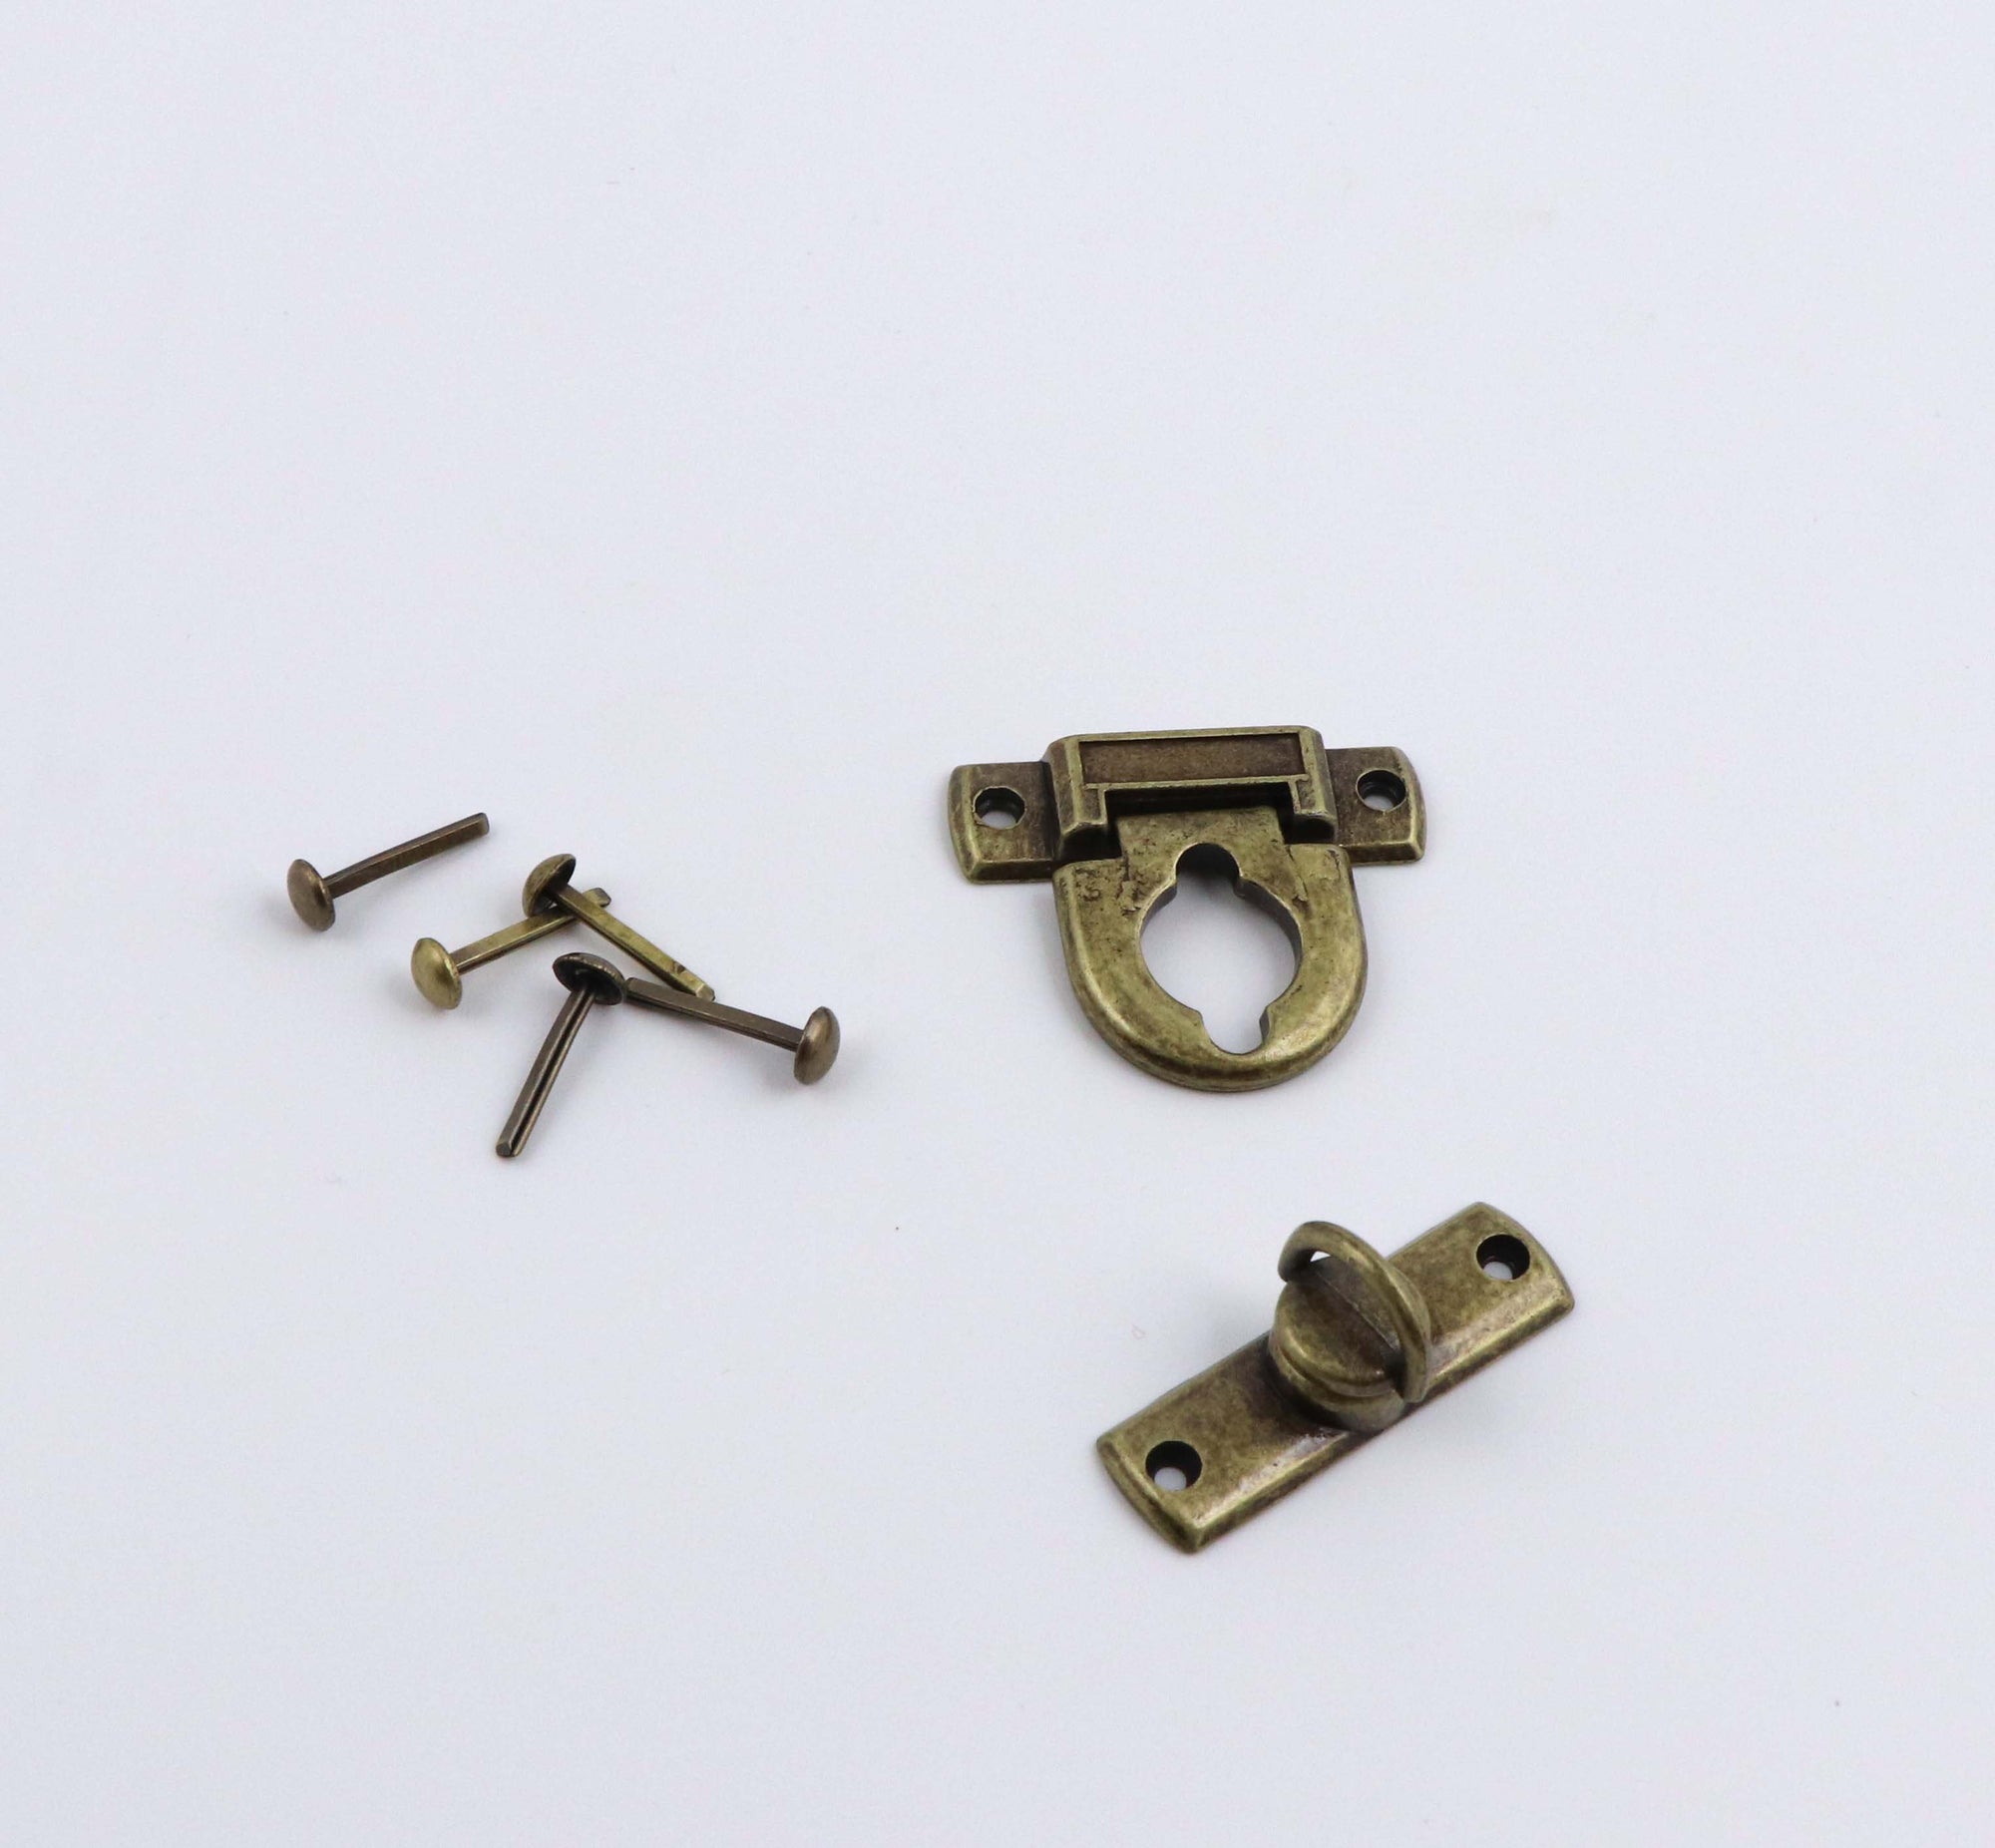 Hinge clasp lock brass, 2 3/4 metal clasp for boxes, HD36 - Colorway Arts